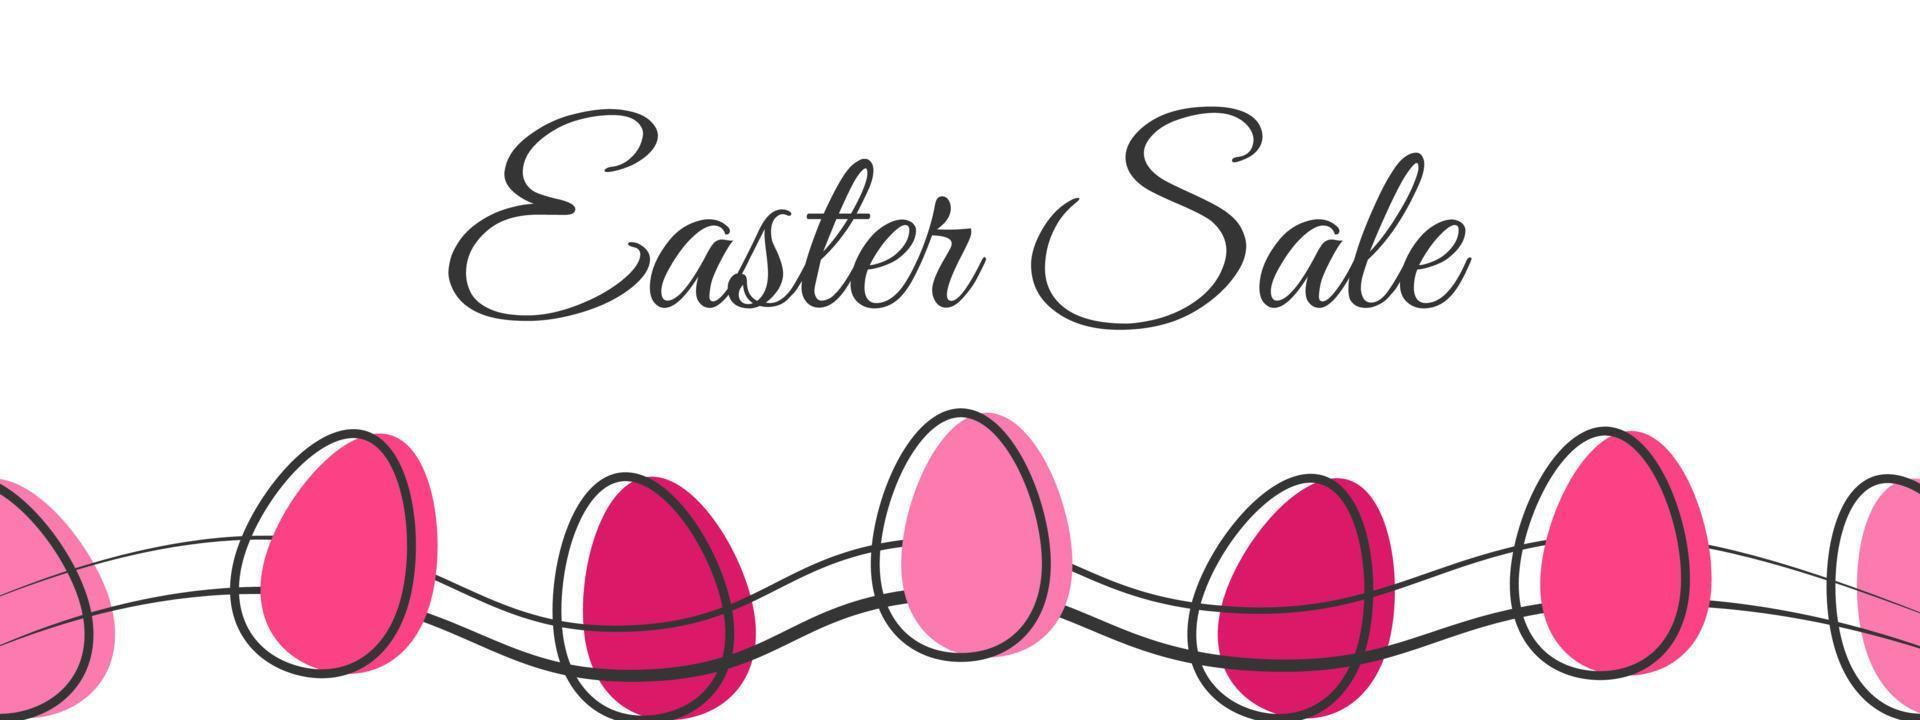 Easter sale web banner. Flat isolated vector template, pink egg with black outline, simple doodle drawing, graphic shape design illustration. Modern celebration background. Shopping marketing concept.